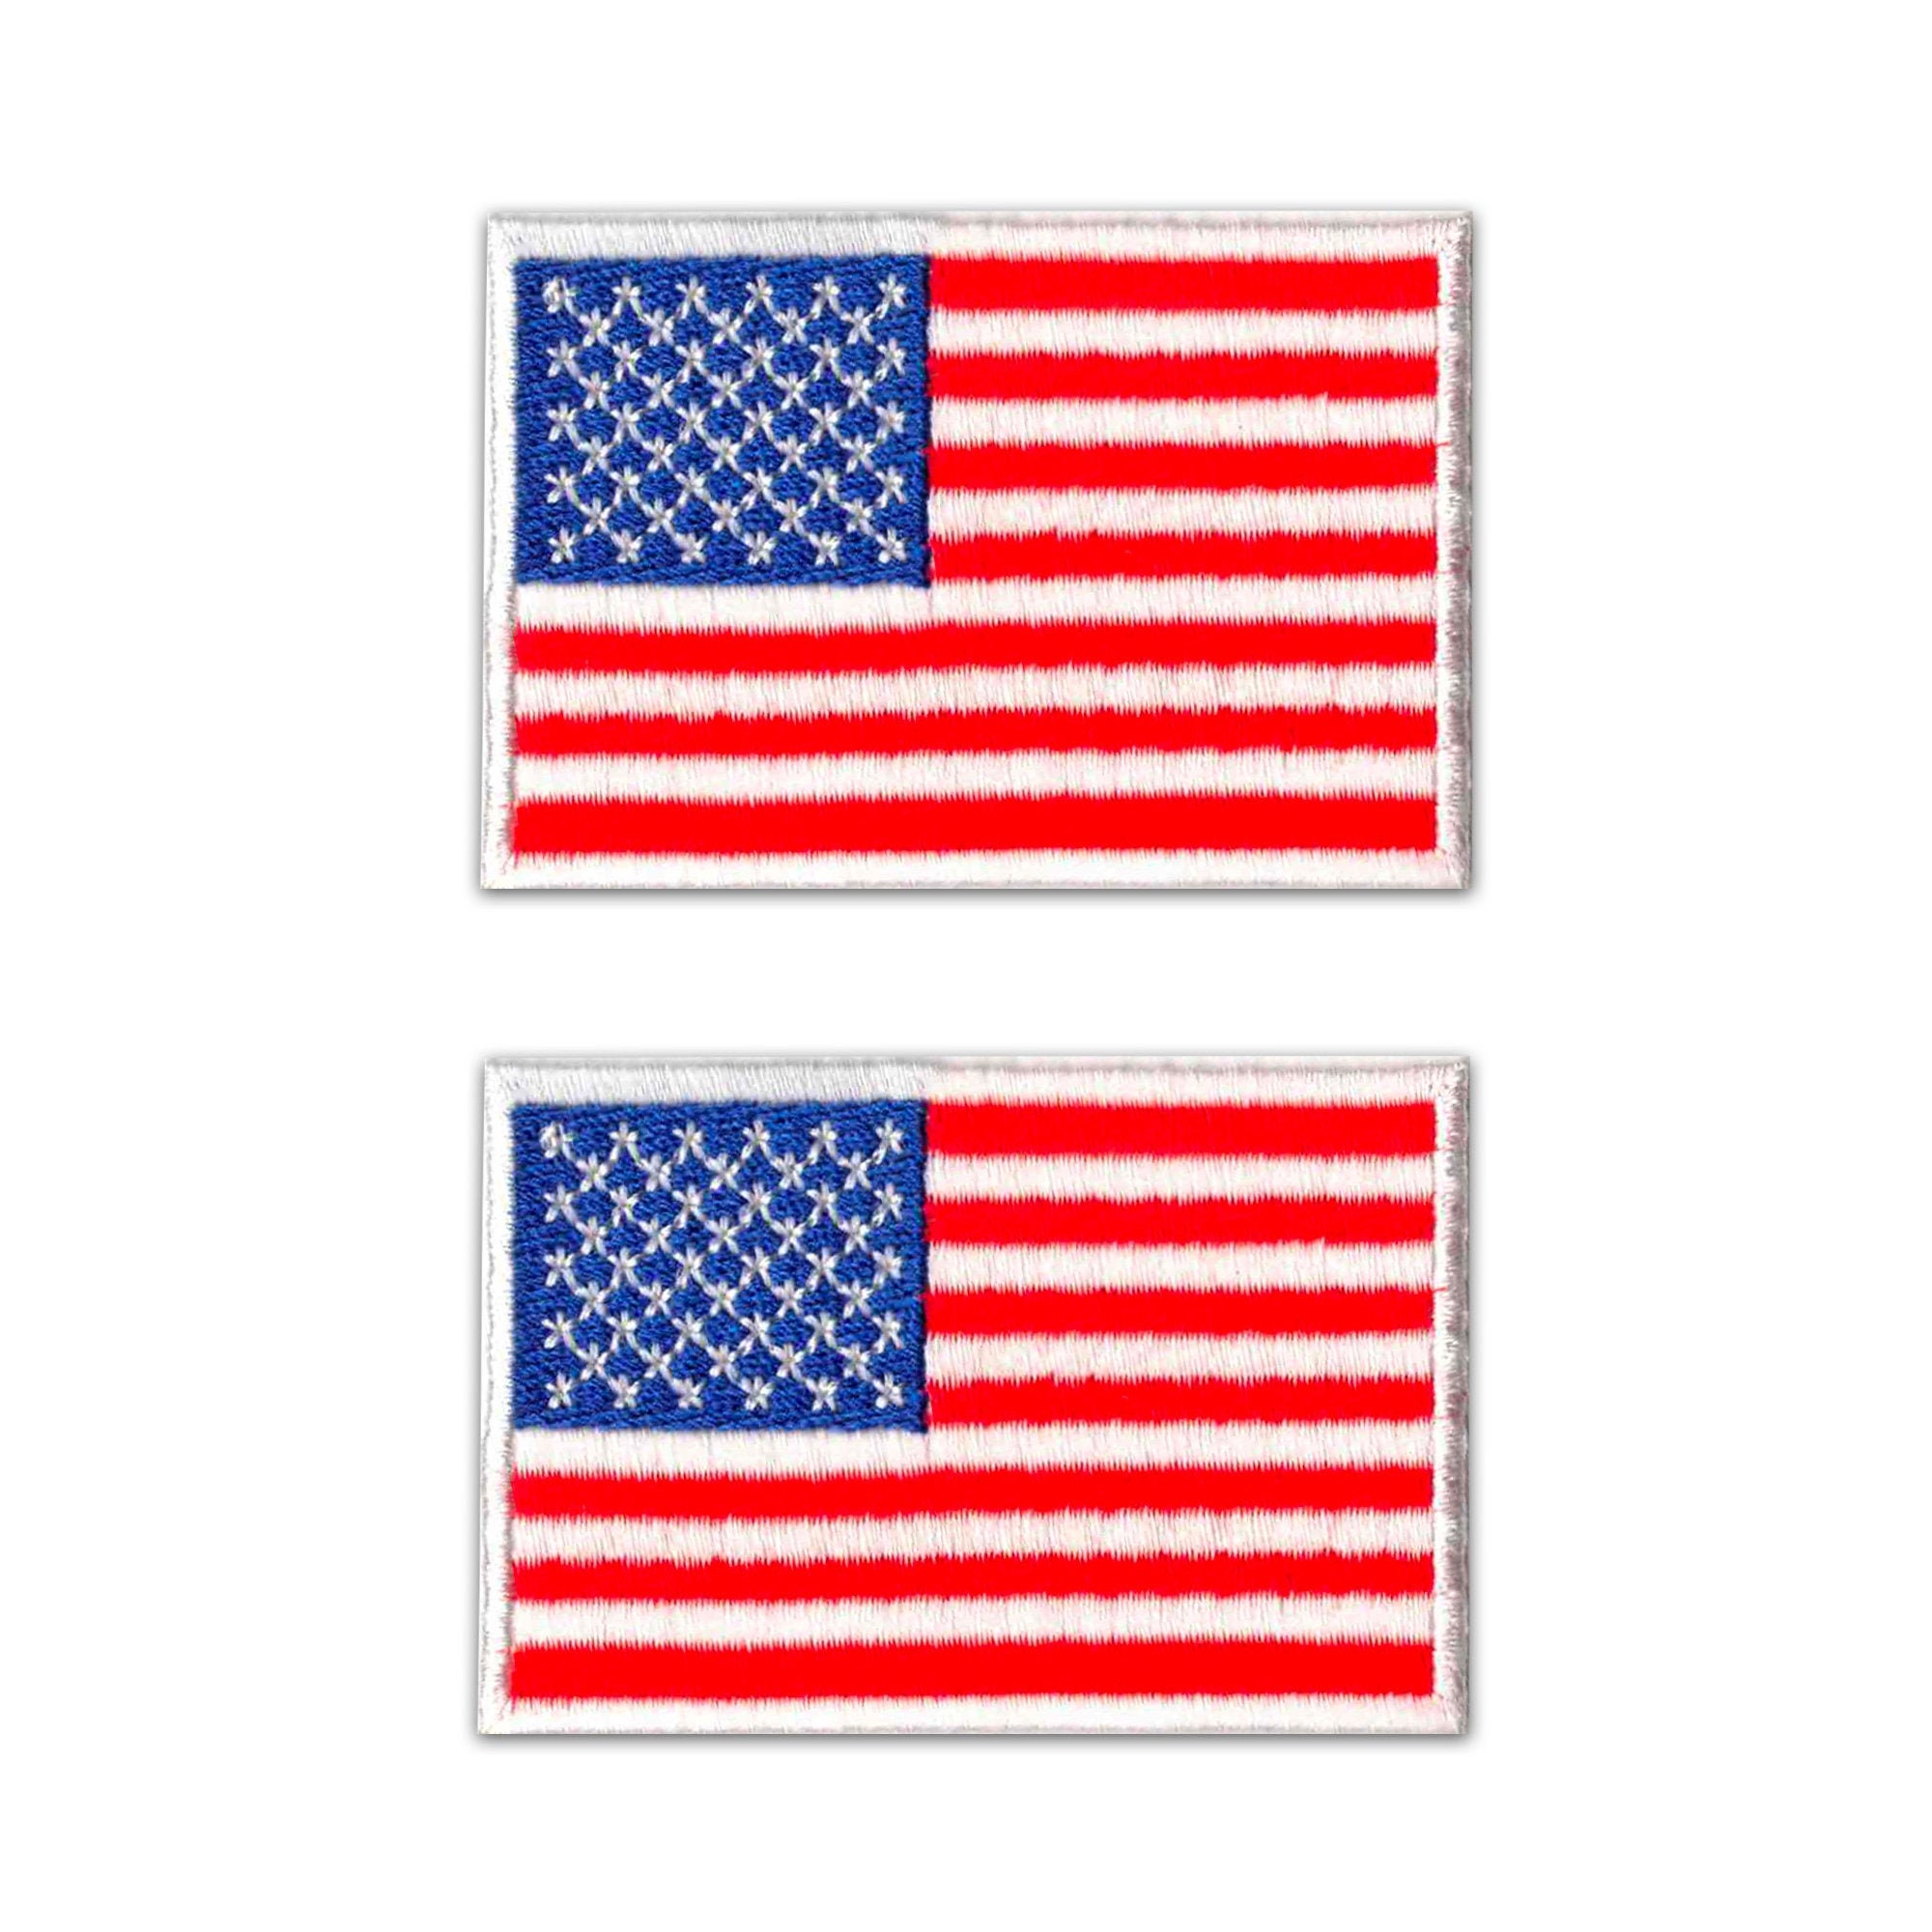 Small American Flag - Gold Border - Iron on Applique/Embroidered Patch 